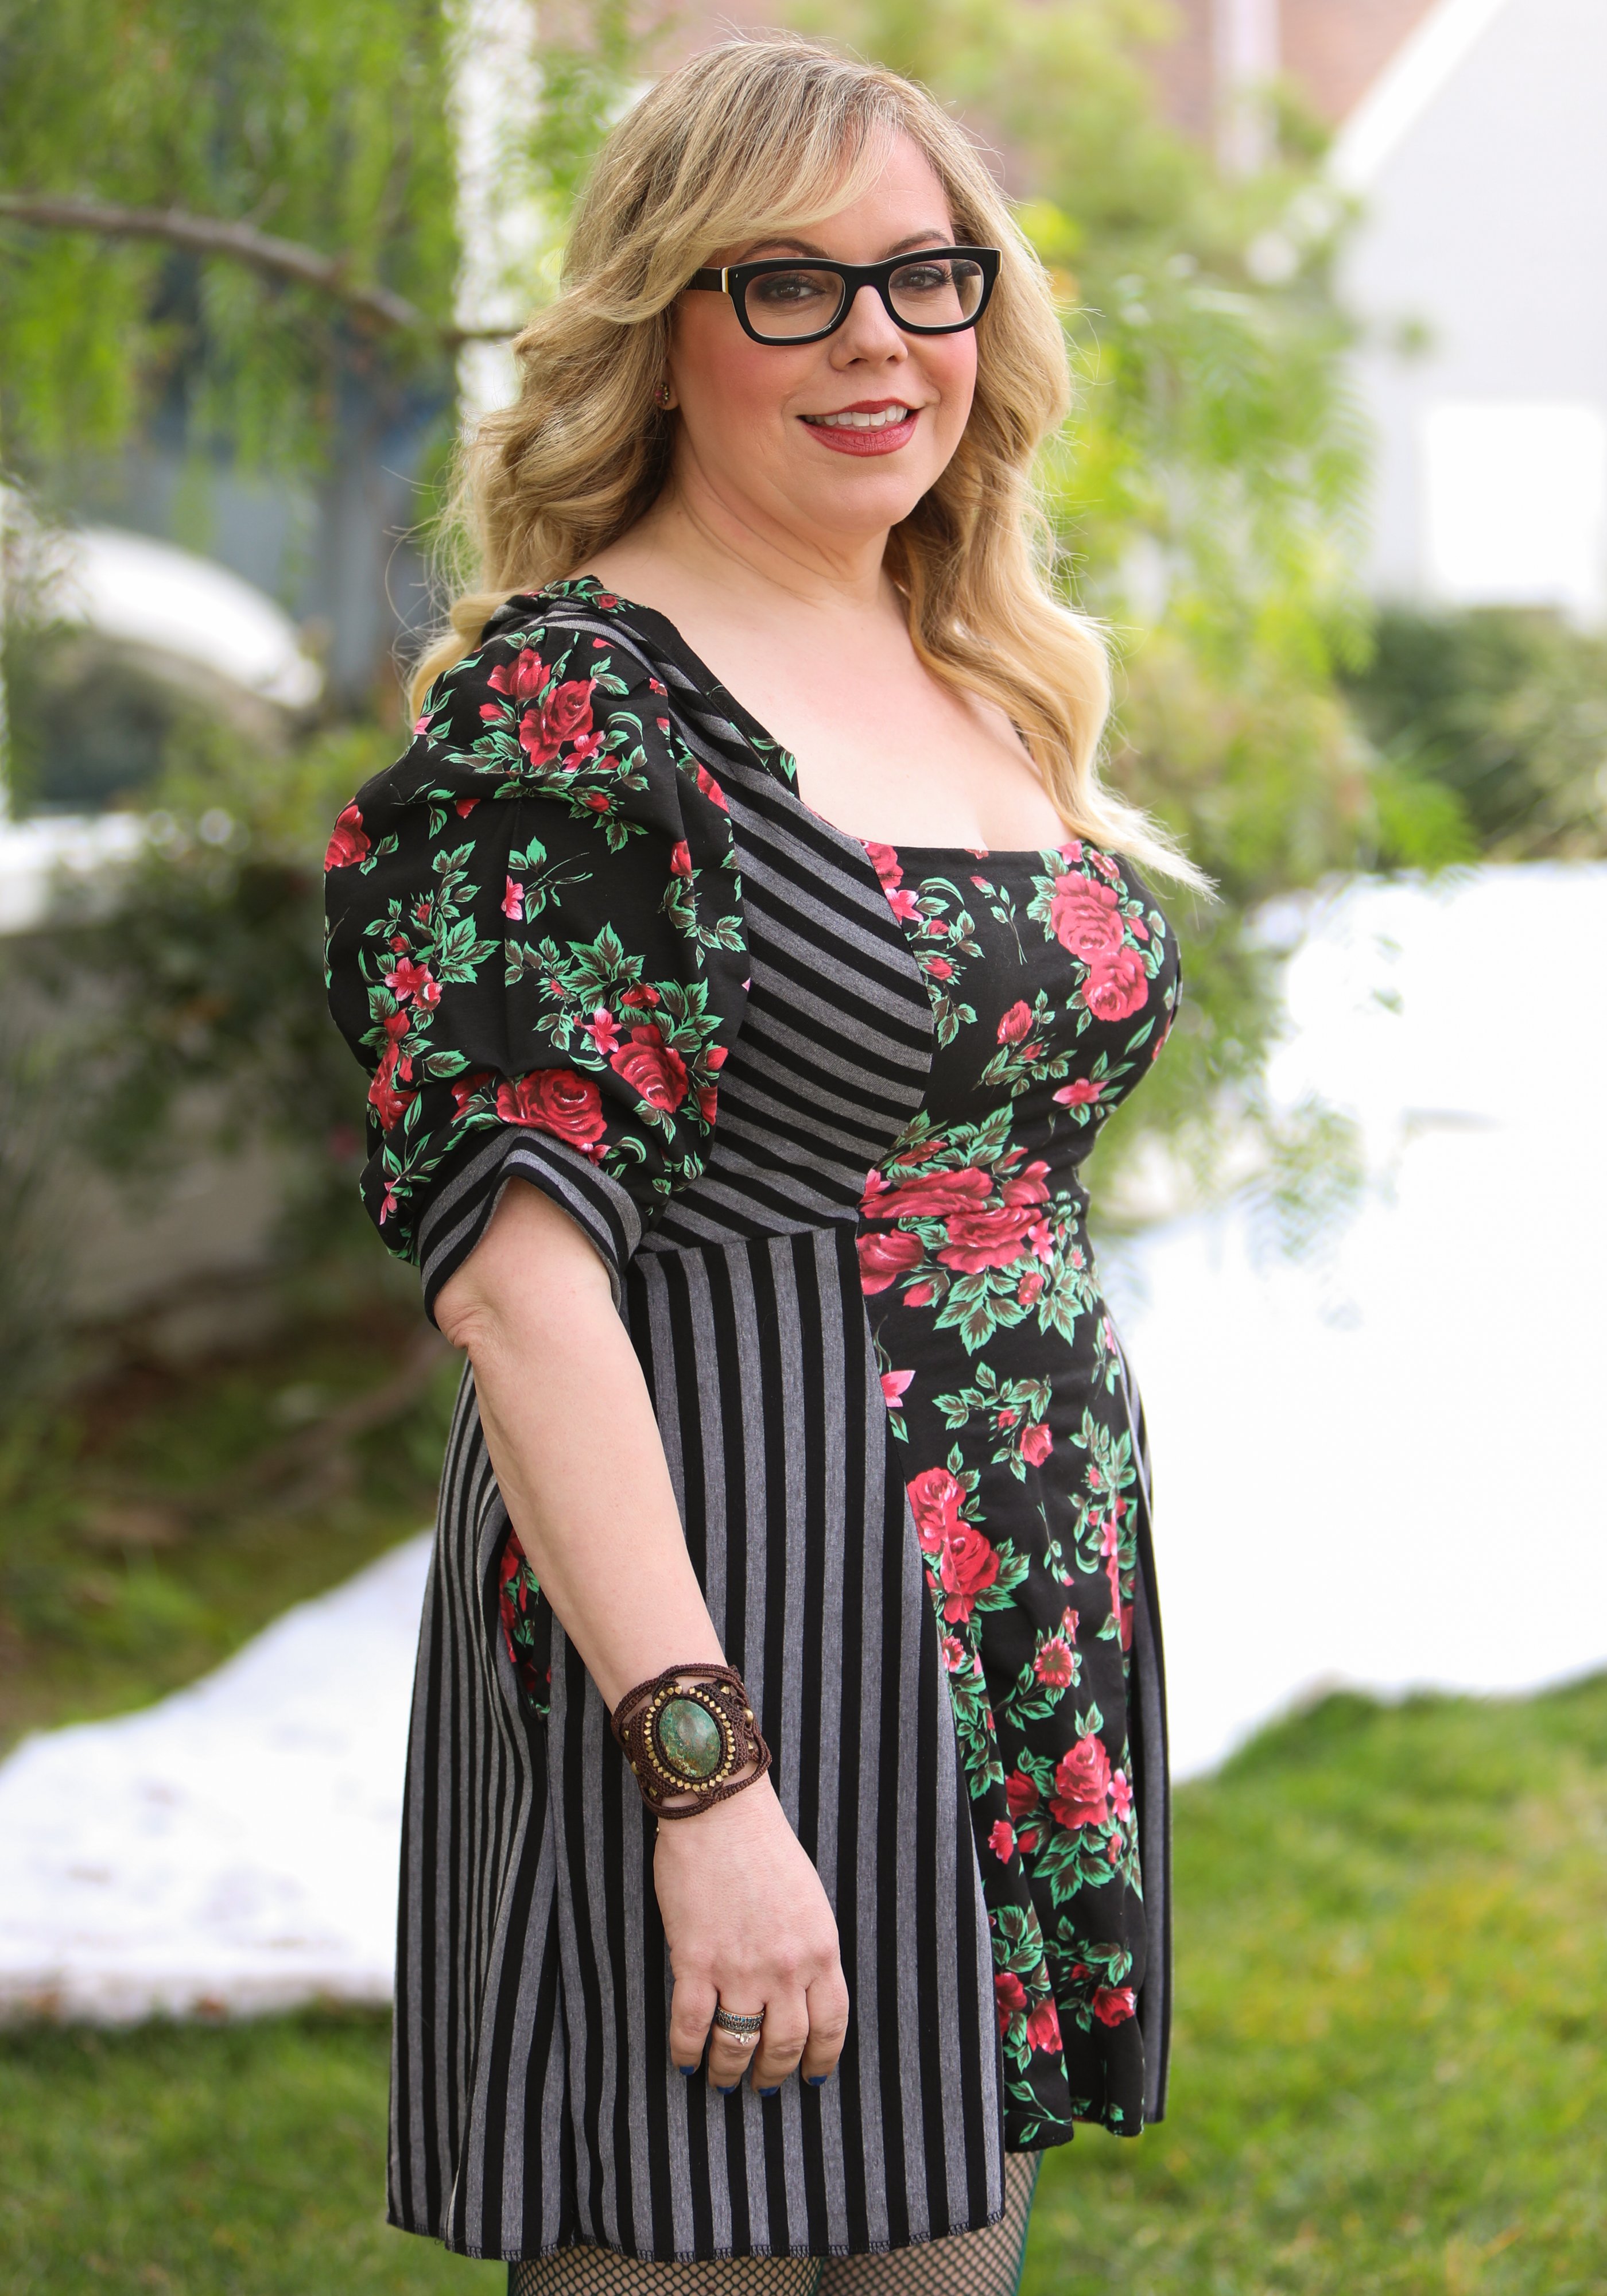 Actress Kirsten Vangsness visits Hallmark Channel's "Home & Family" at Universal Studios Hollywood on January 21, 2020 in Universal City, California. | Source: Getty Images